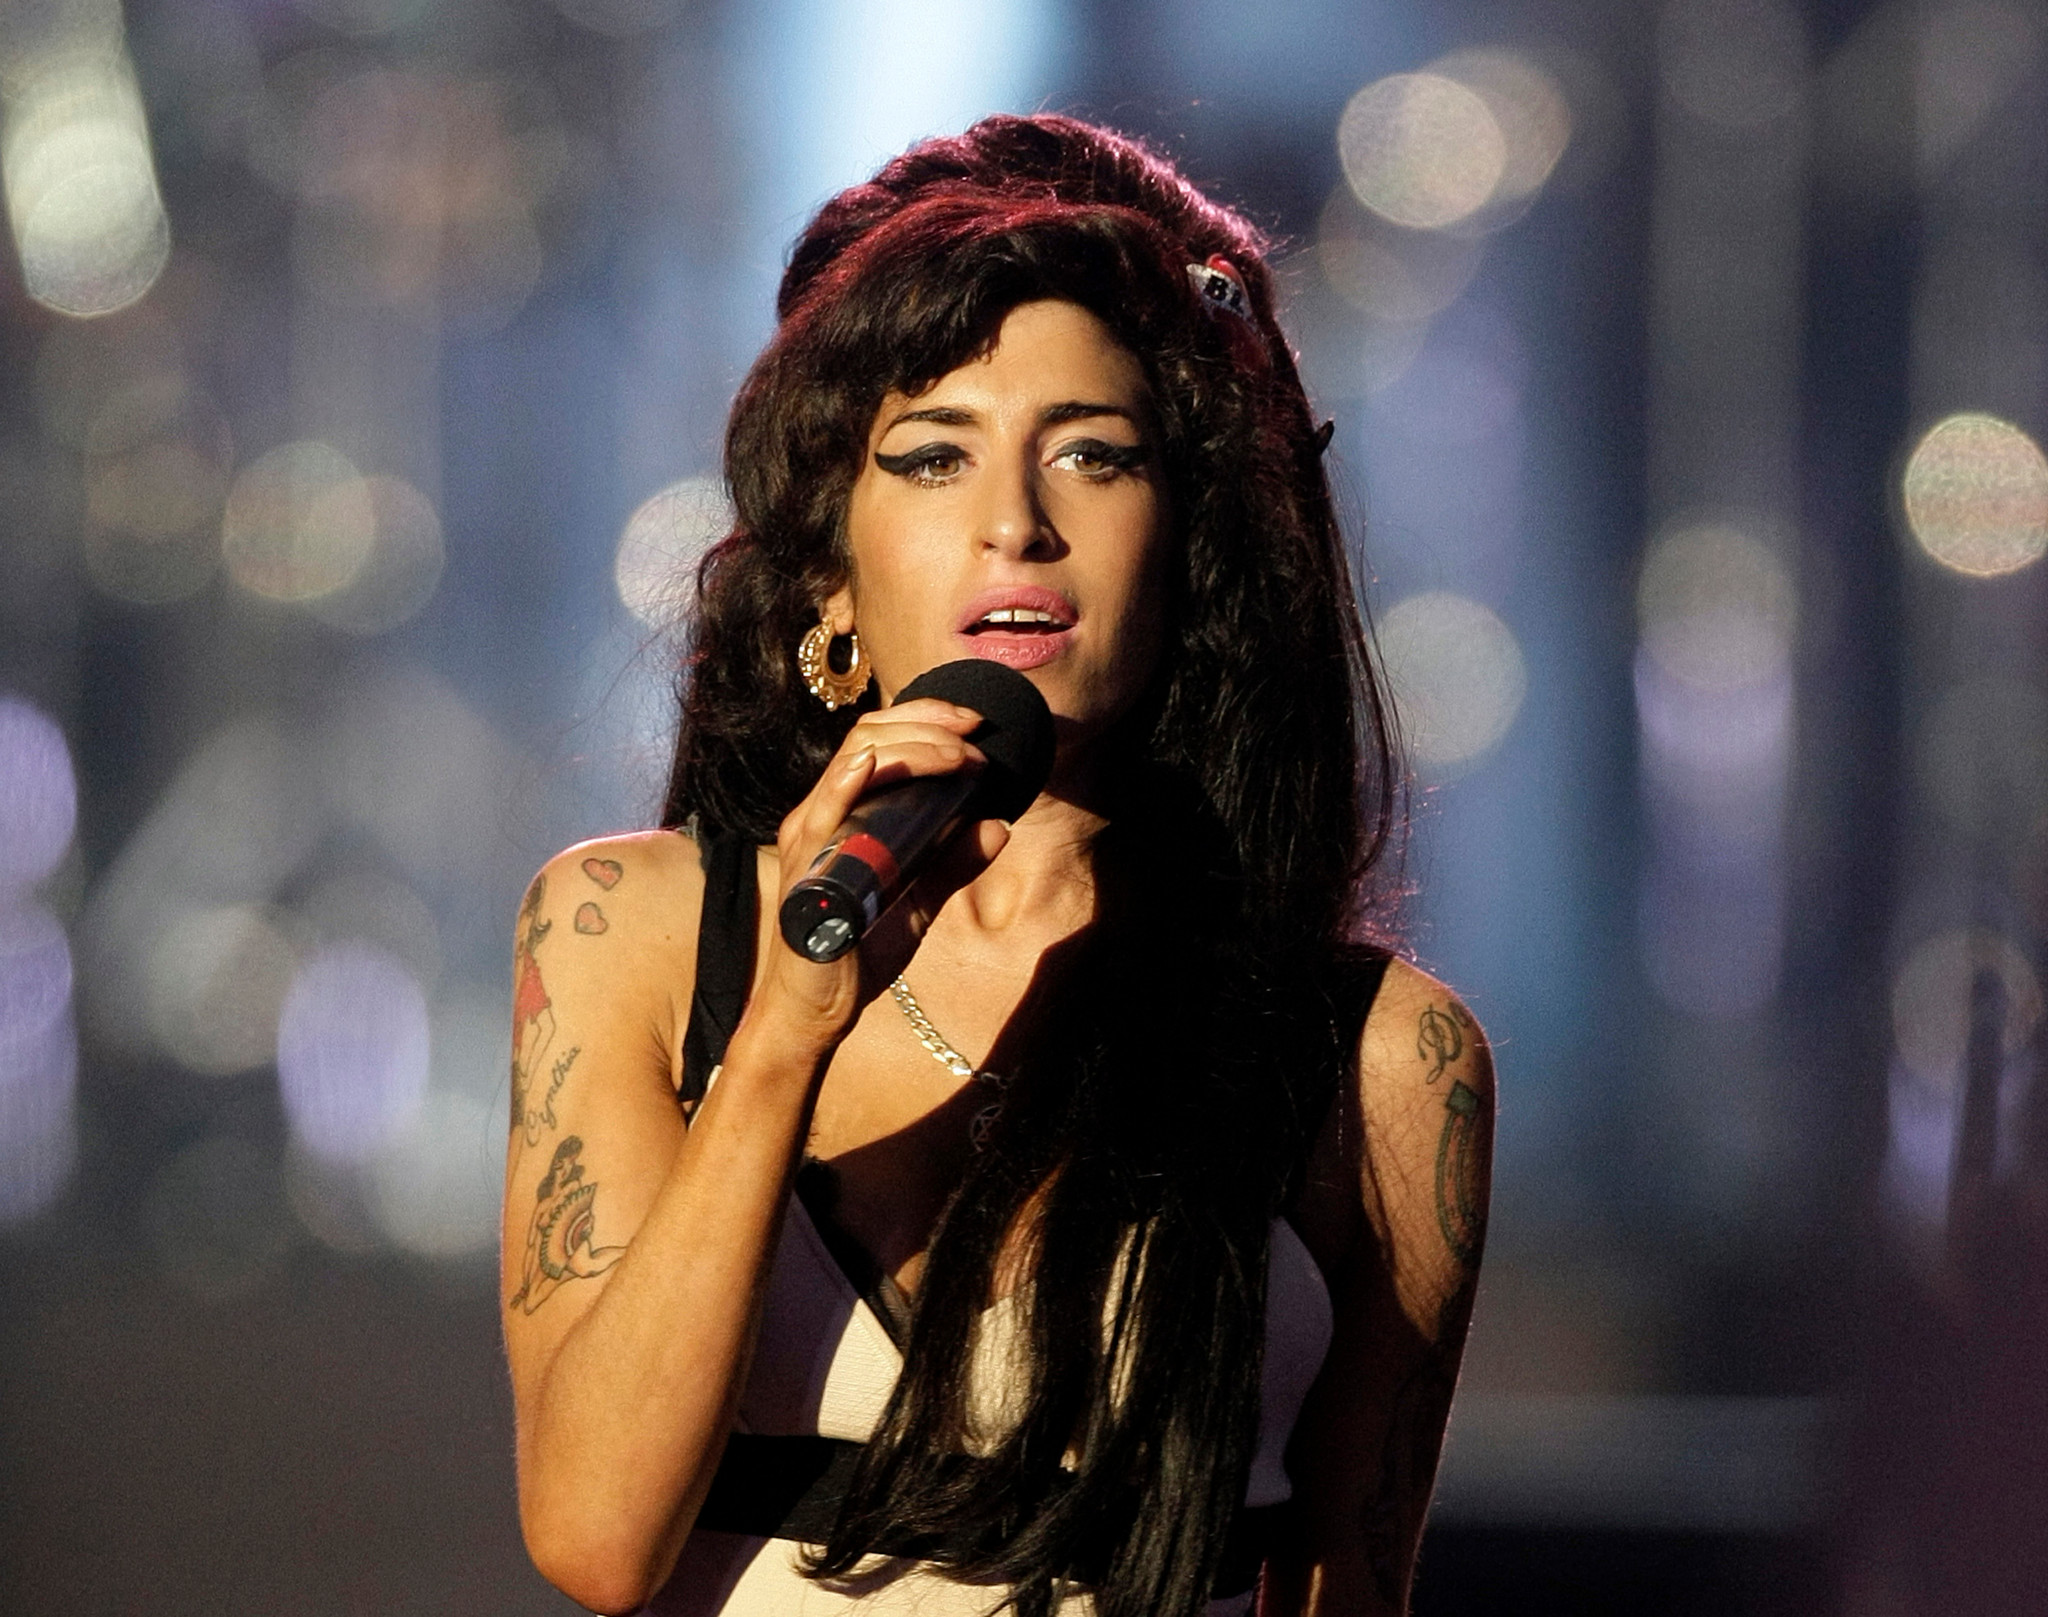 British singer Amy Winehouse performs during the 46664 concert in honour of Nelson Mandela's 90th birthday in Hyde Park, central London, on June 27, 2008. The three-hour gig will also support Mandela's 46664 campaign against HIV/AIDS. AFP PHOTO /Shaun Curry (Photo by SHAUN CURRY / AFP)